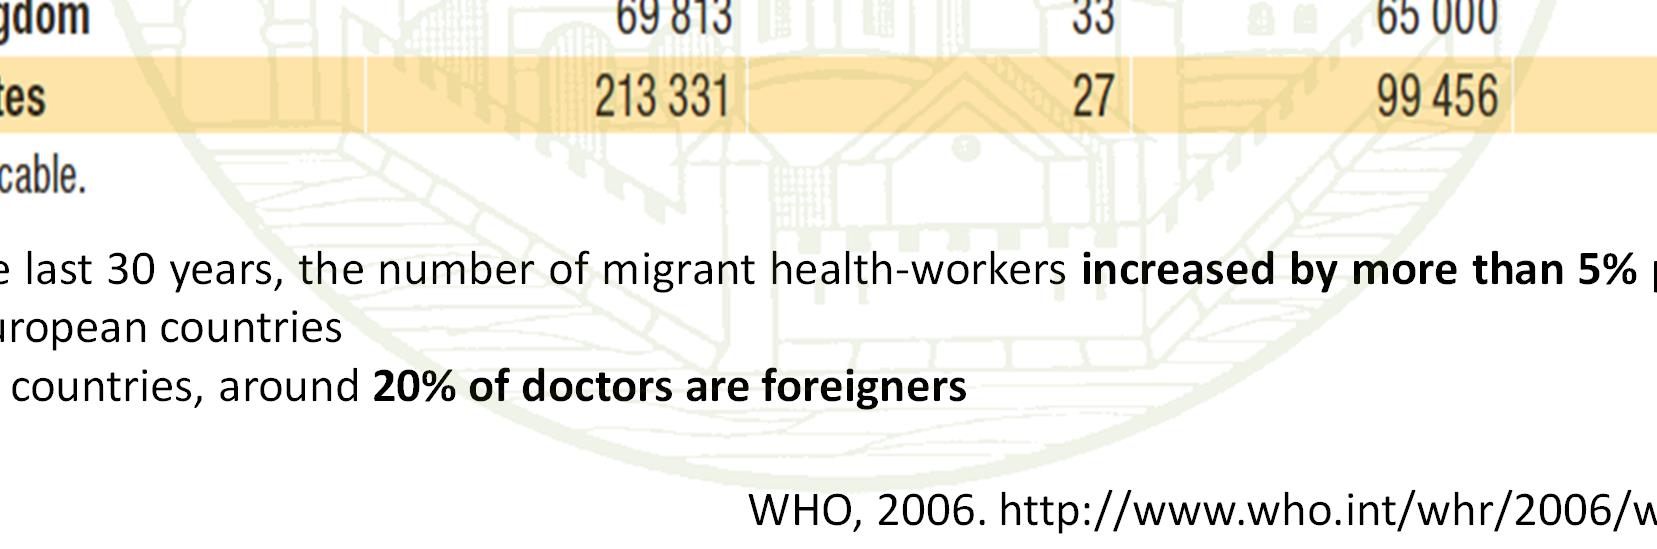 7 billion $ (UK) - 846 million $ (USA) Over the last 30 years, the number of migrant health-workers